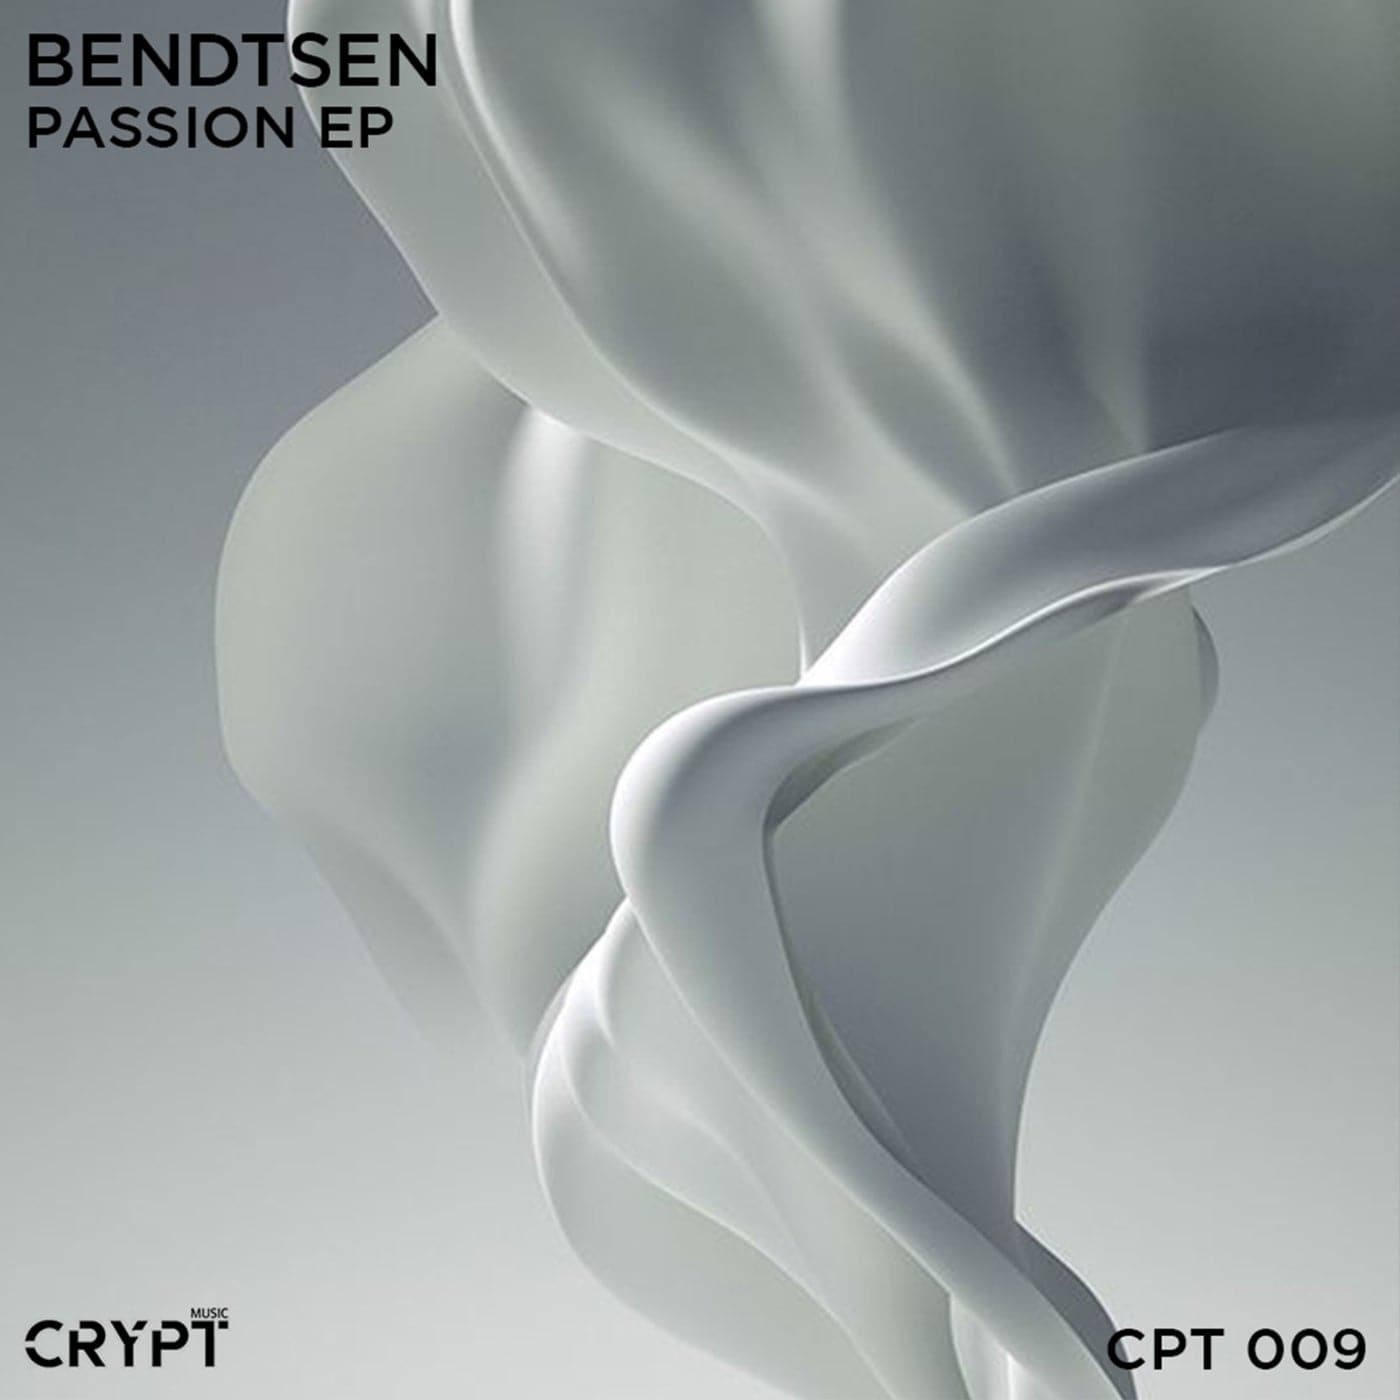 Download Bendtsen - Passion on Electrobuzz